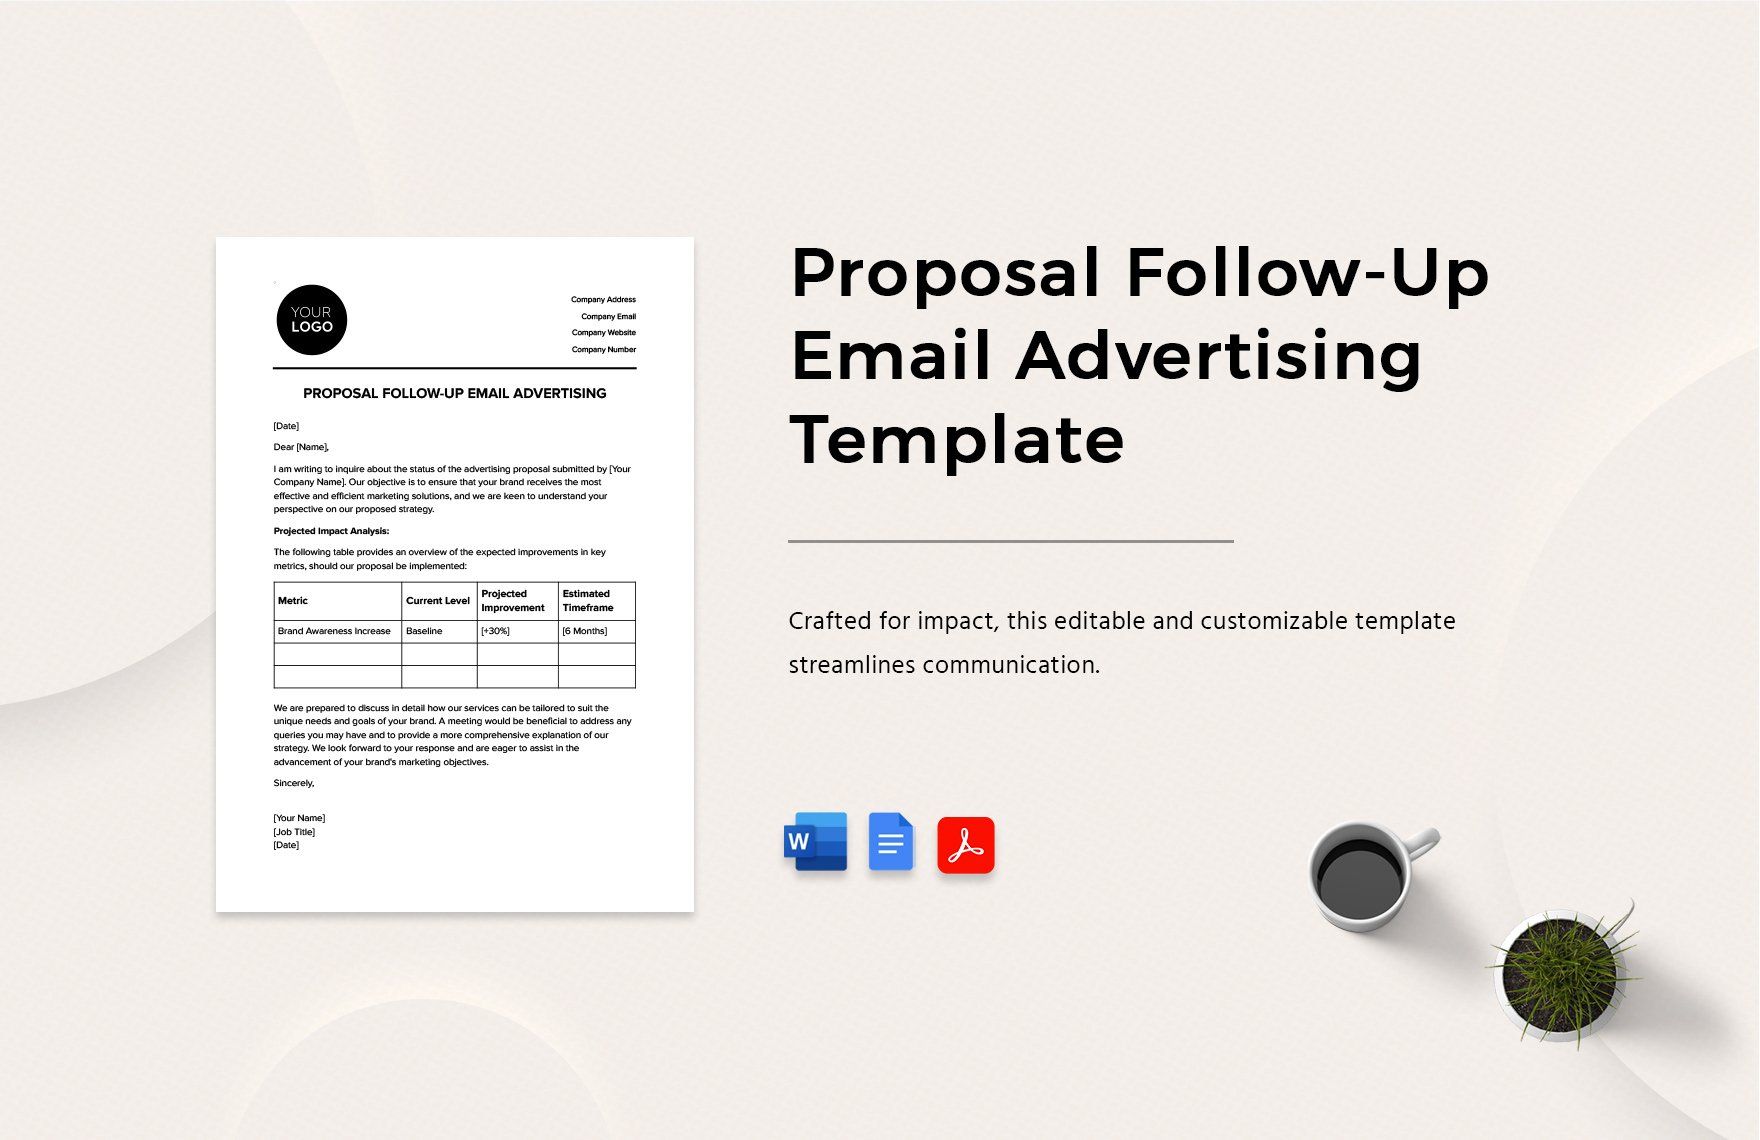 Proposal Follow-Up Email Advertising Template